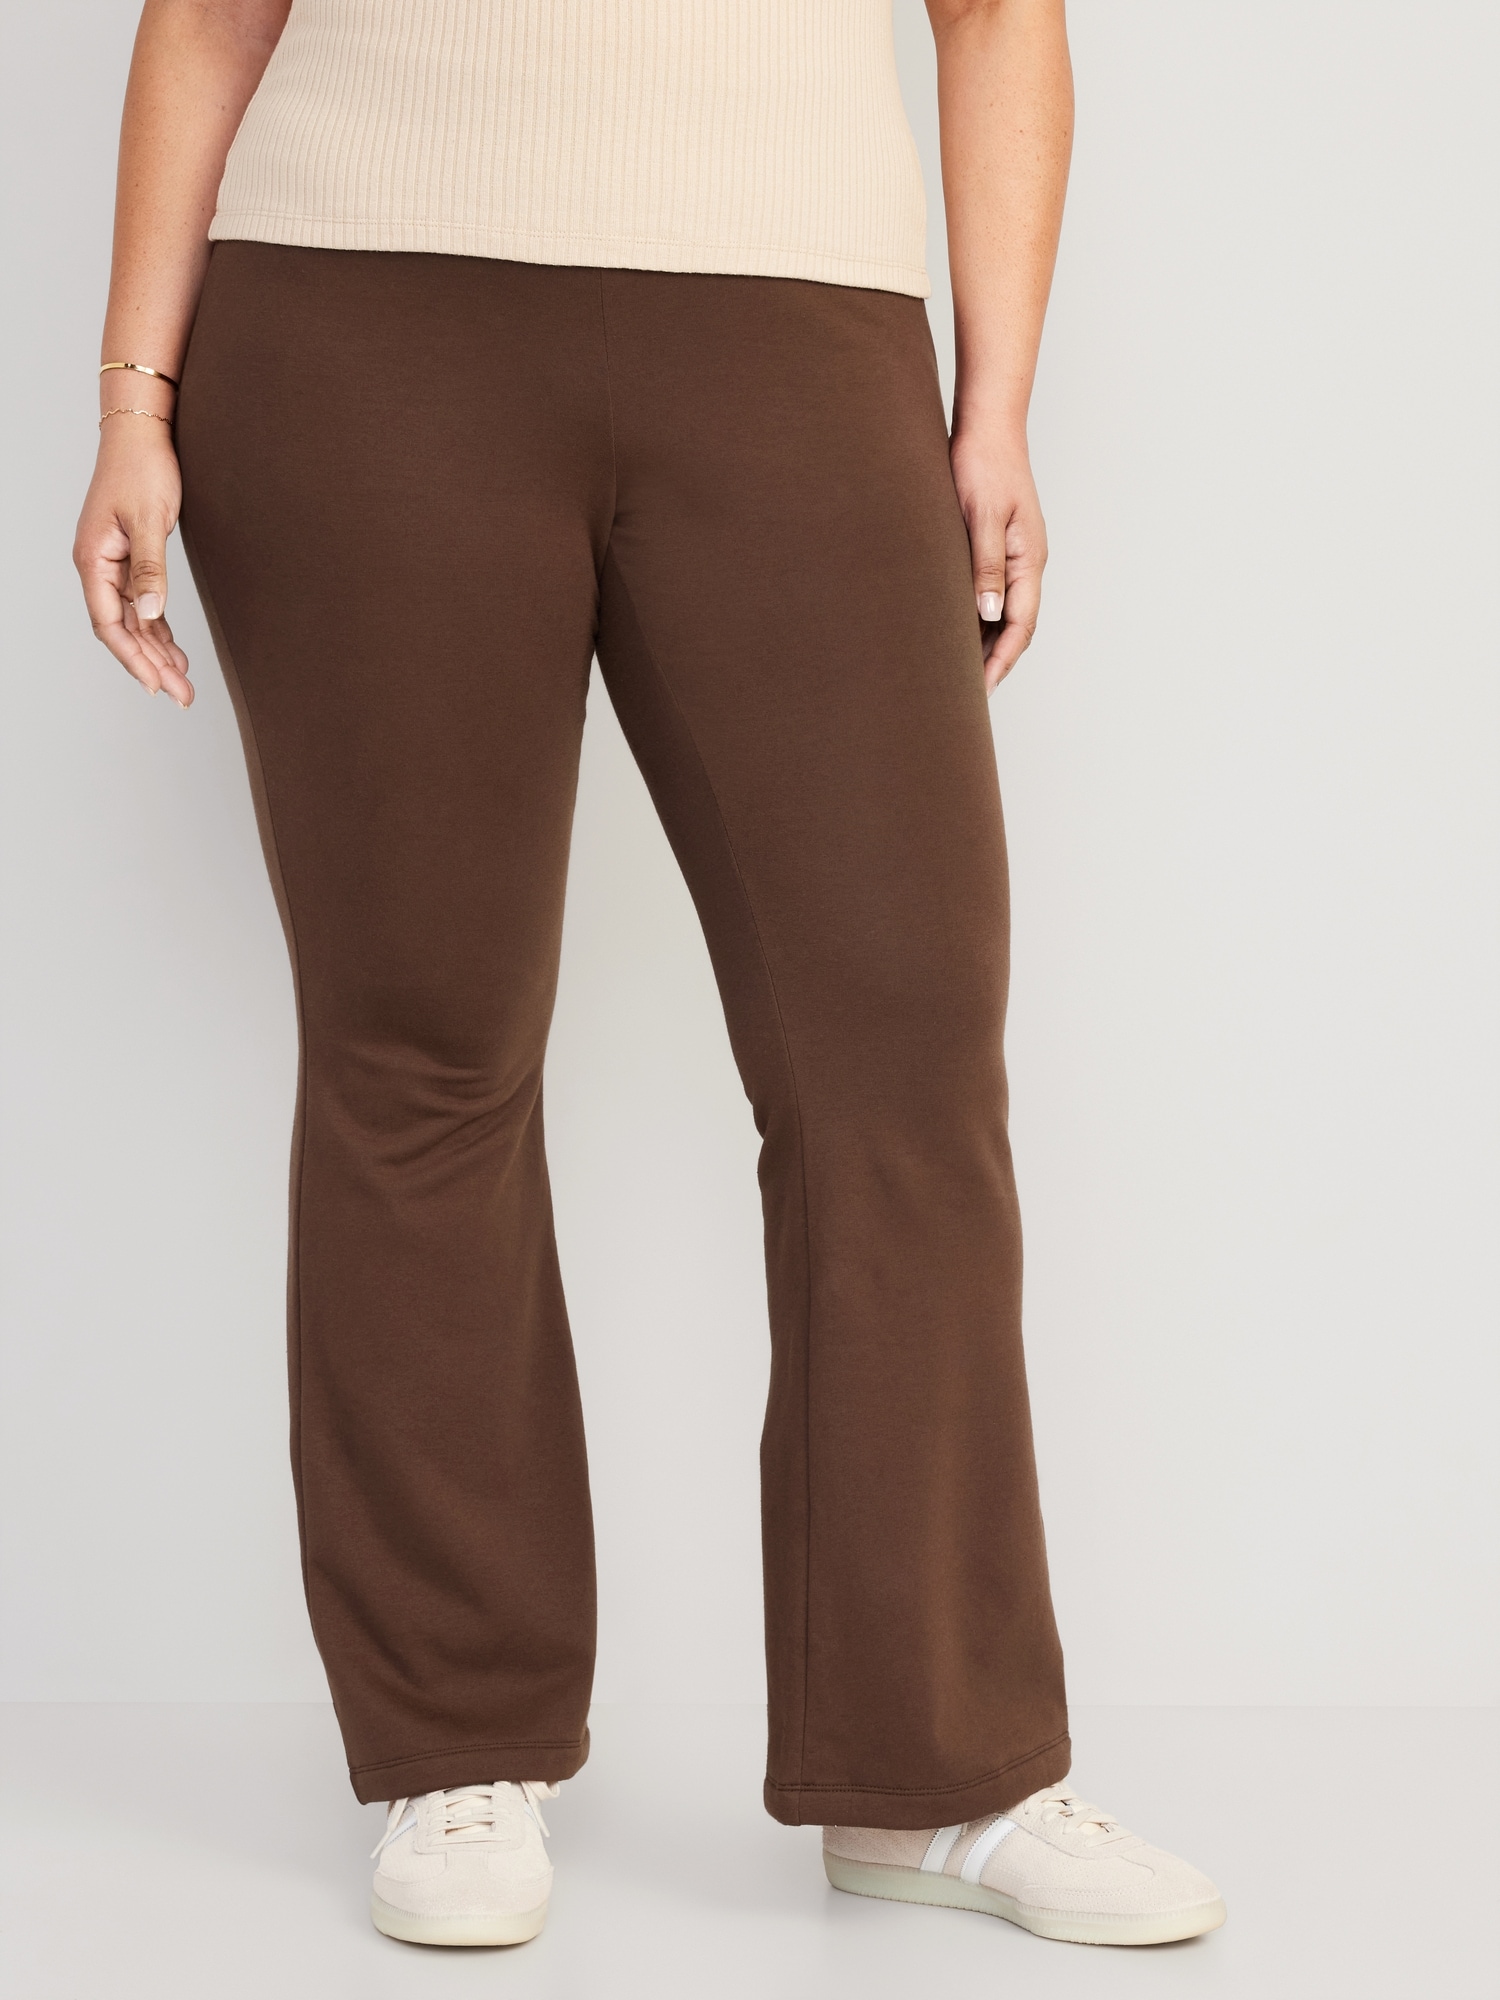 Old Navy Flared Athletic Pants for Women